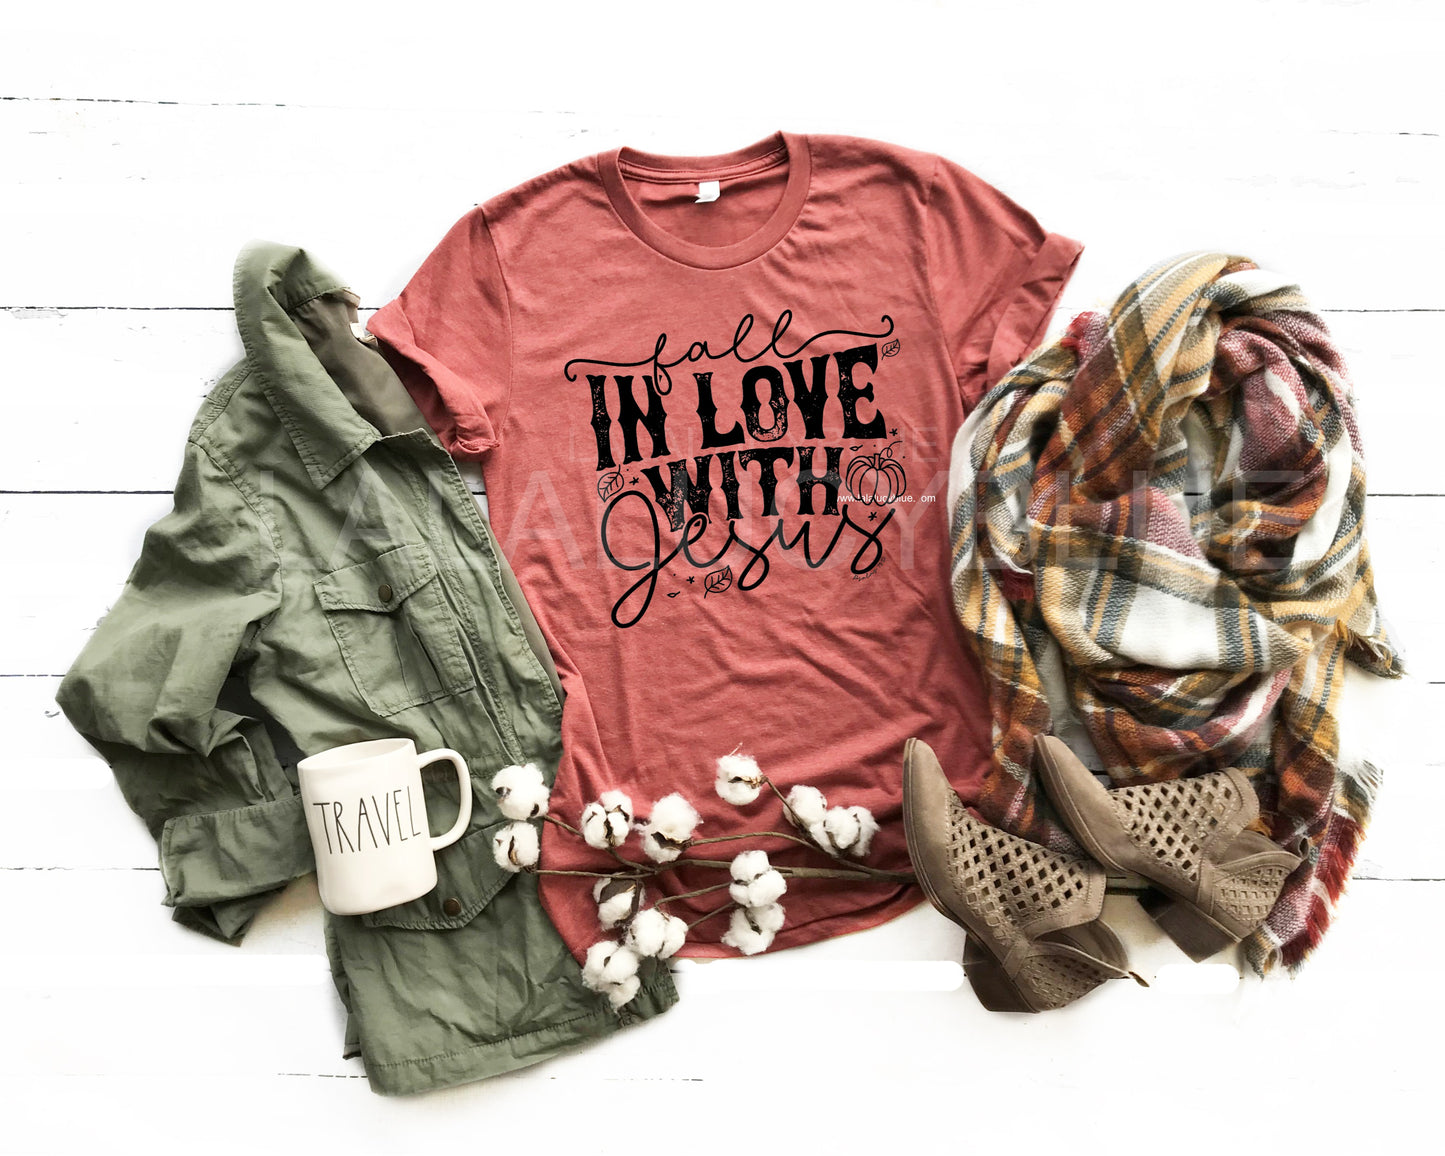 Fall In Love With Jesus Tee